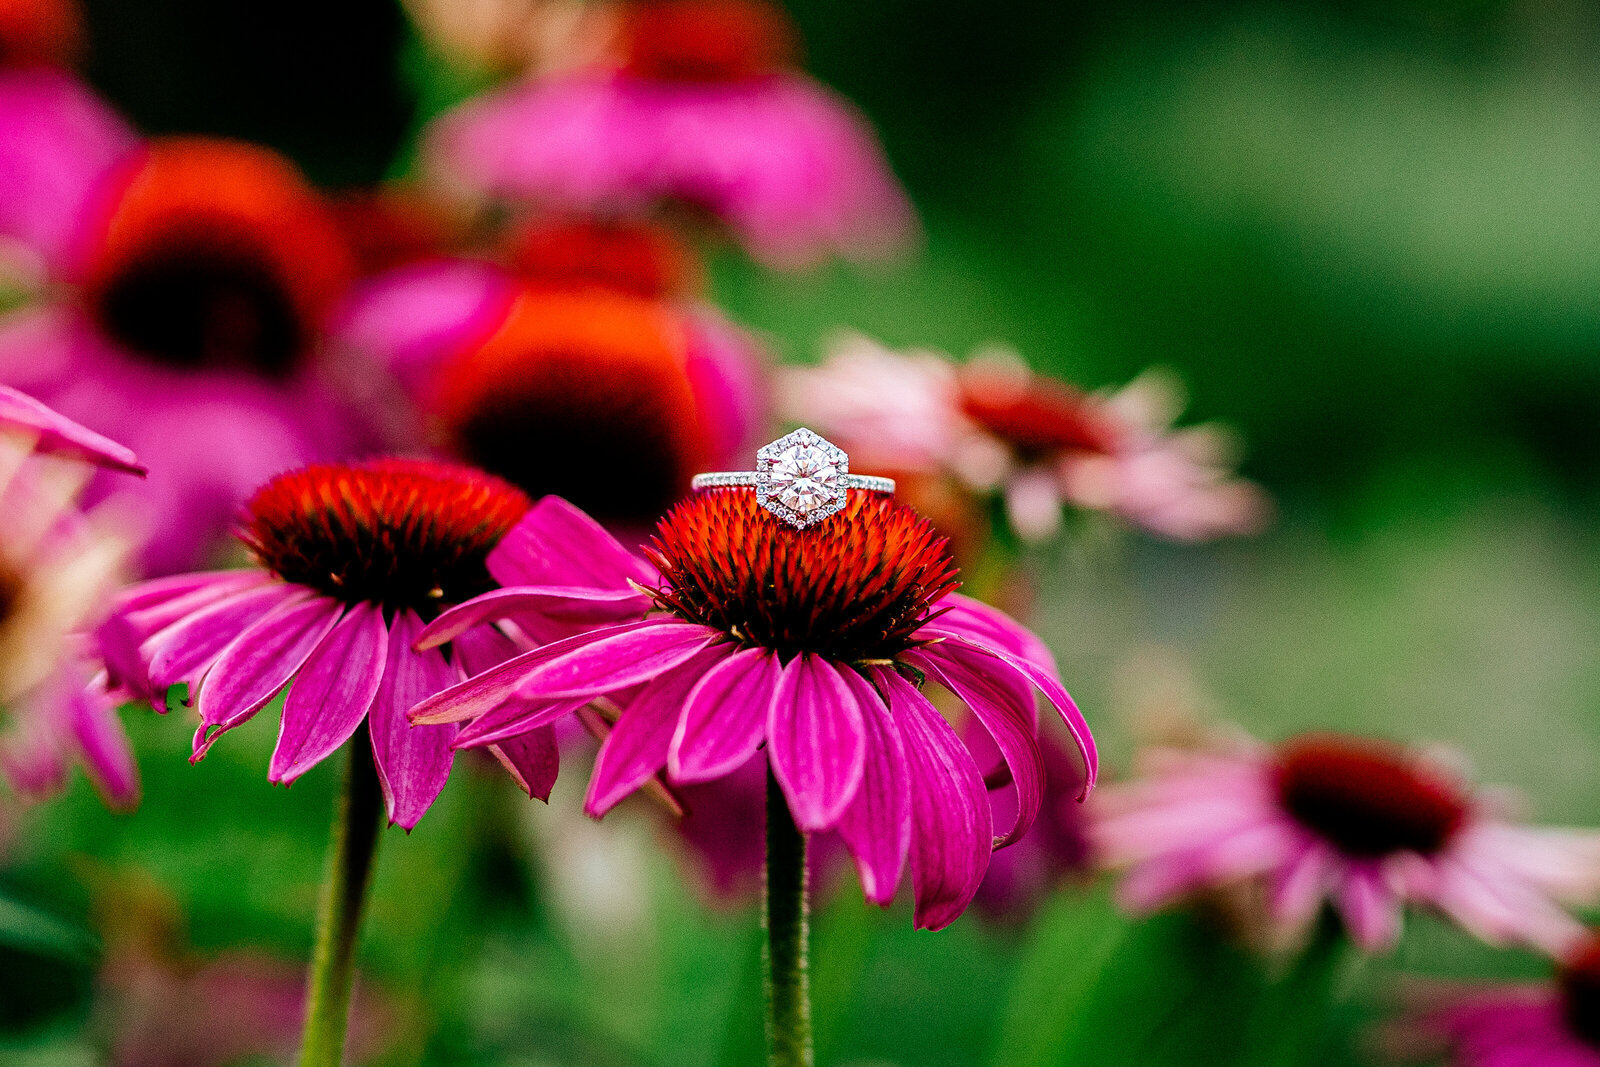 A diamond engagement ring sitting on top of a vibrant pink daisy during an engagement session at Green Spring Gardens Park in Northern Virginia